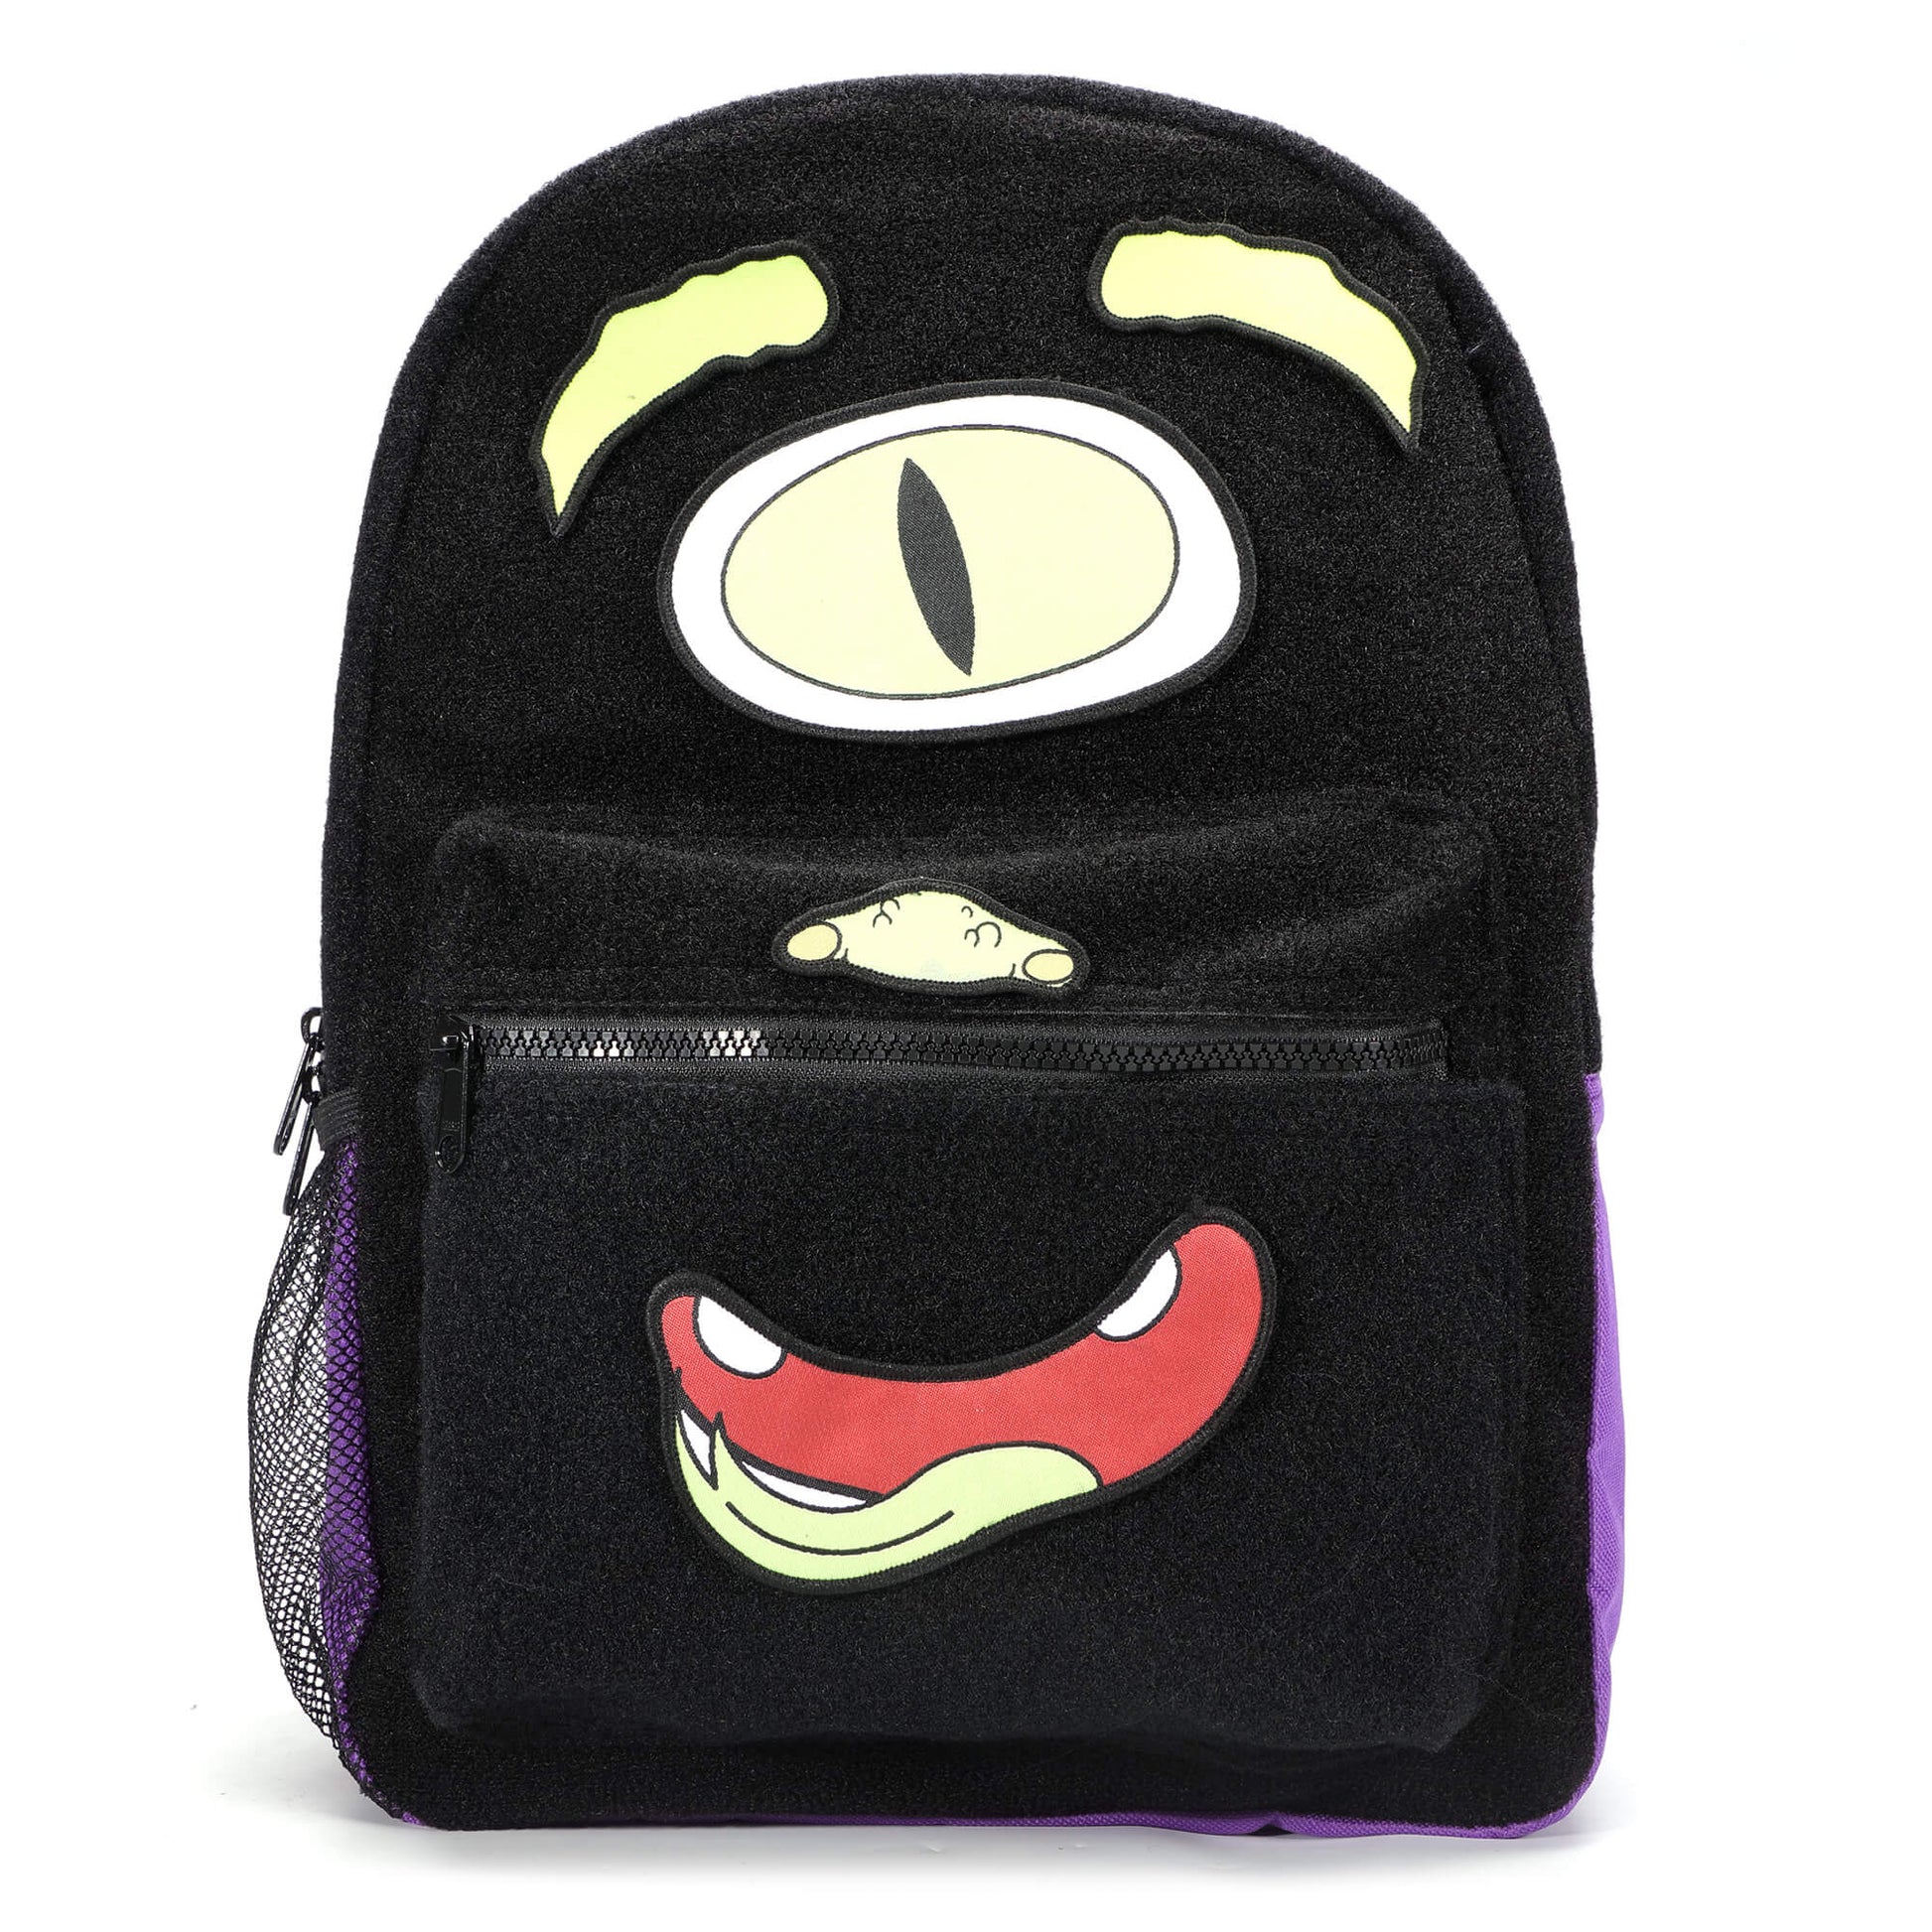 A backpack for kids with a cute and whimsical monster character design, featuring multiple pockets and a soft, padded back for all-day comfort.